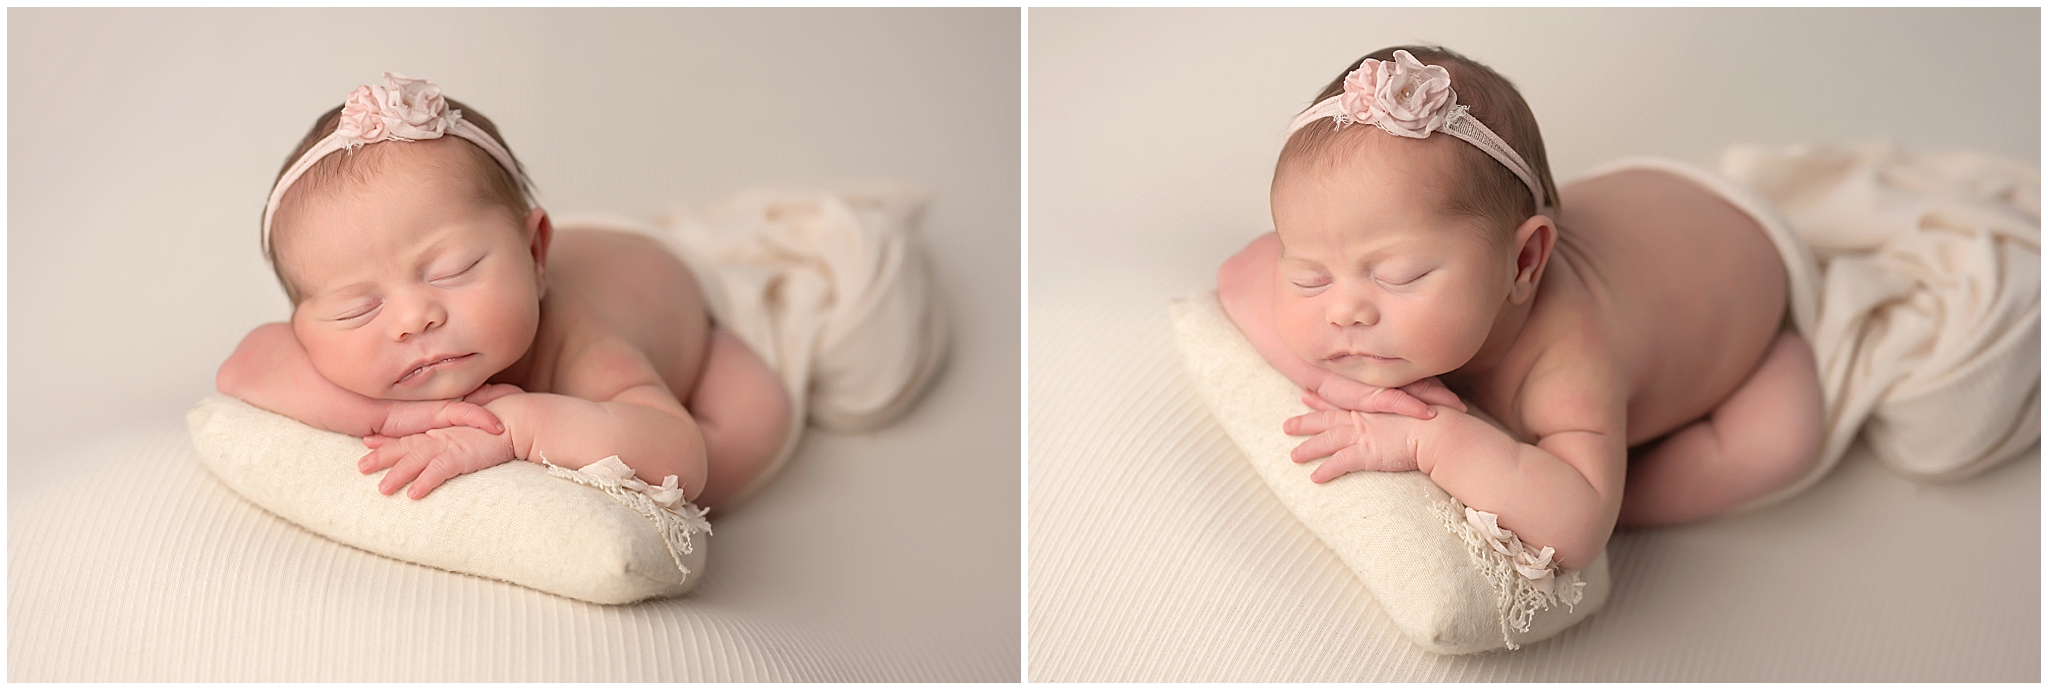 baby girl sleeping on tiny pillow during newborn session at photography studio in london ontario